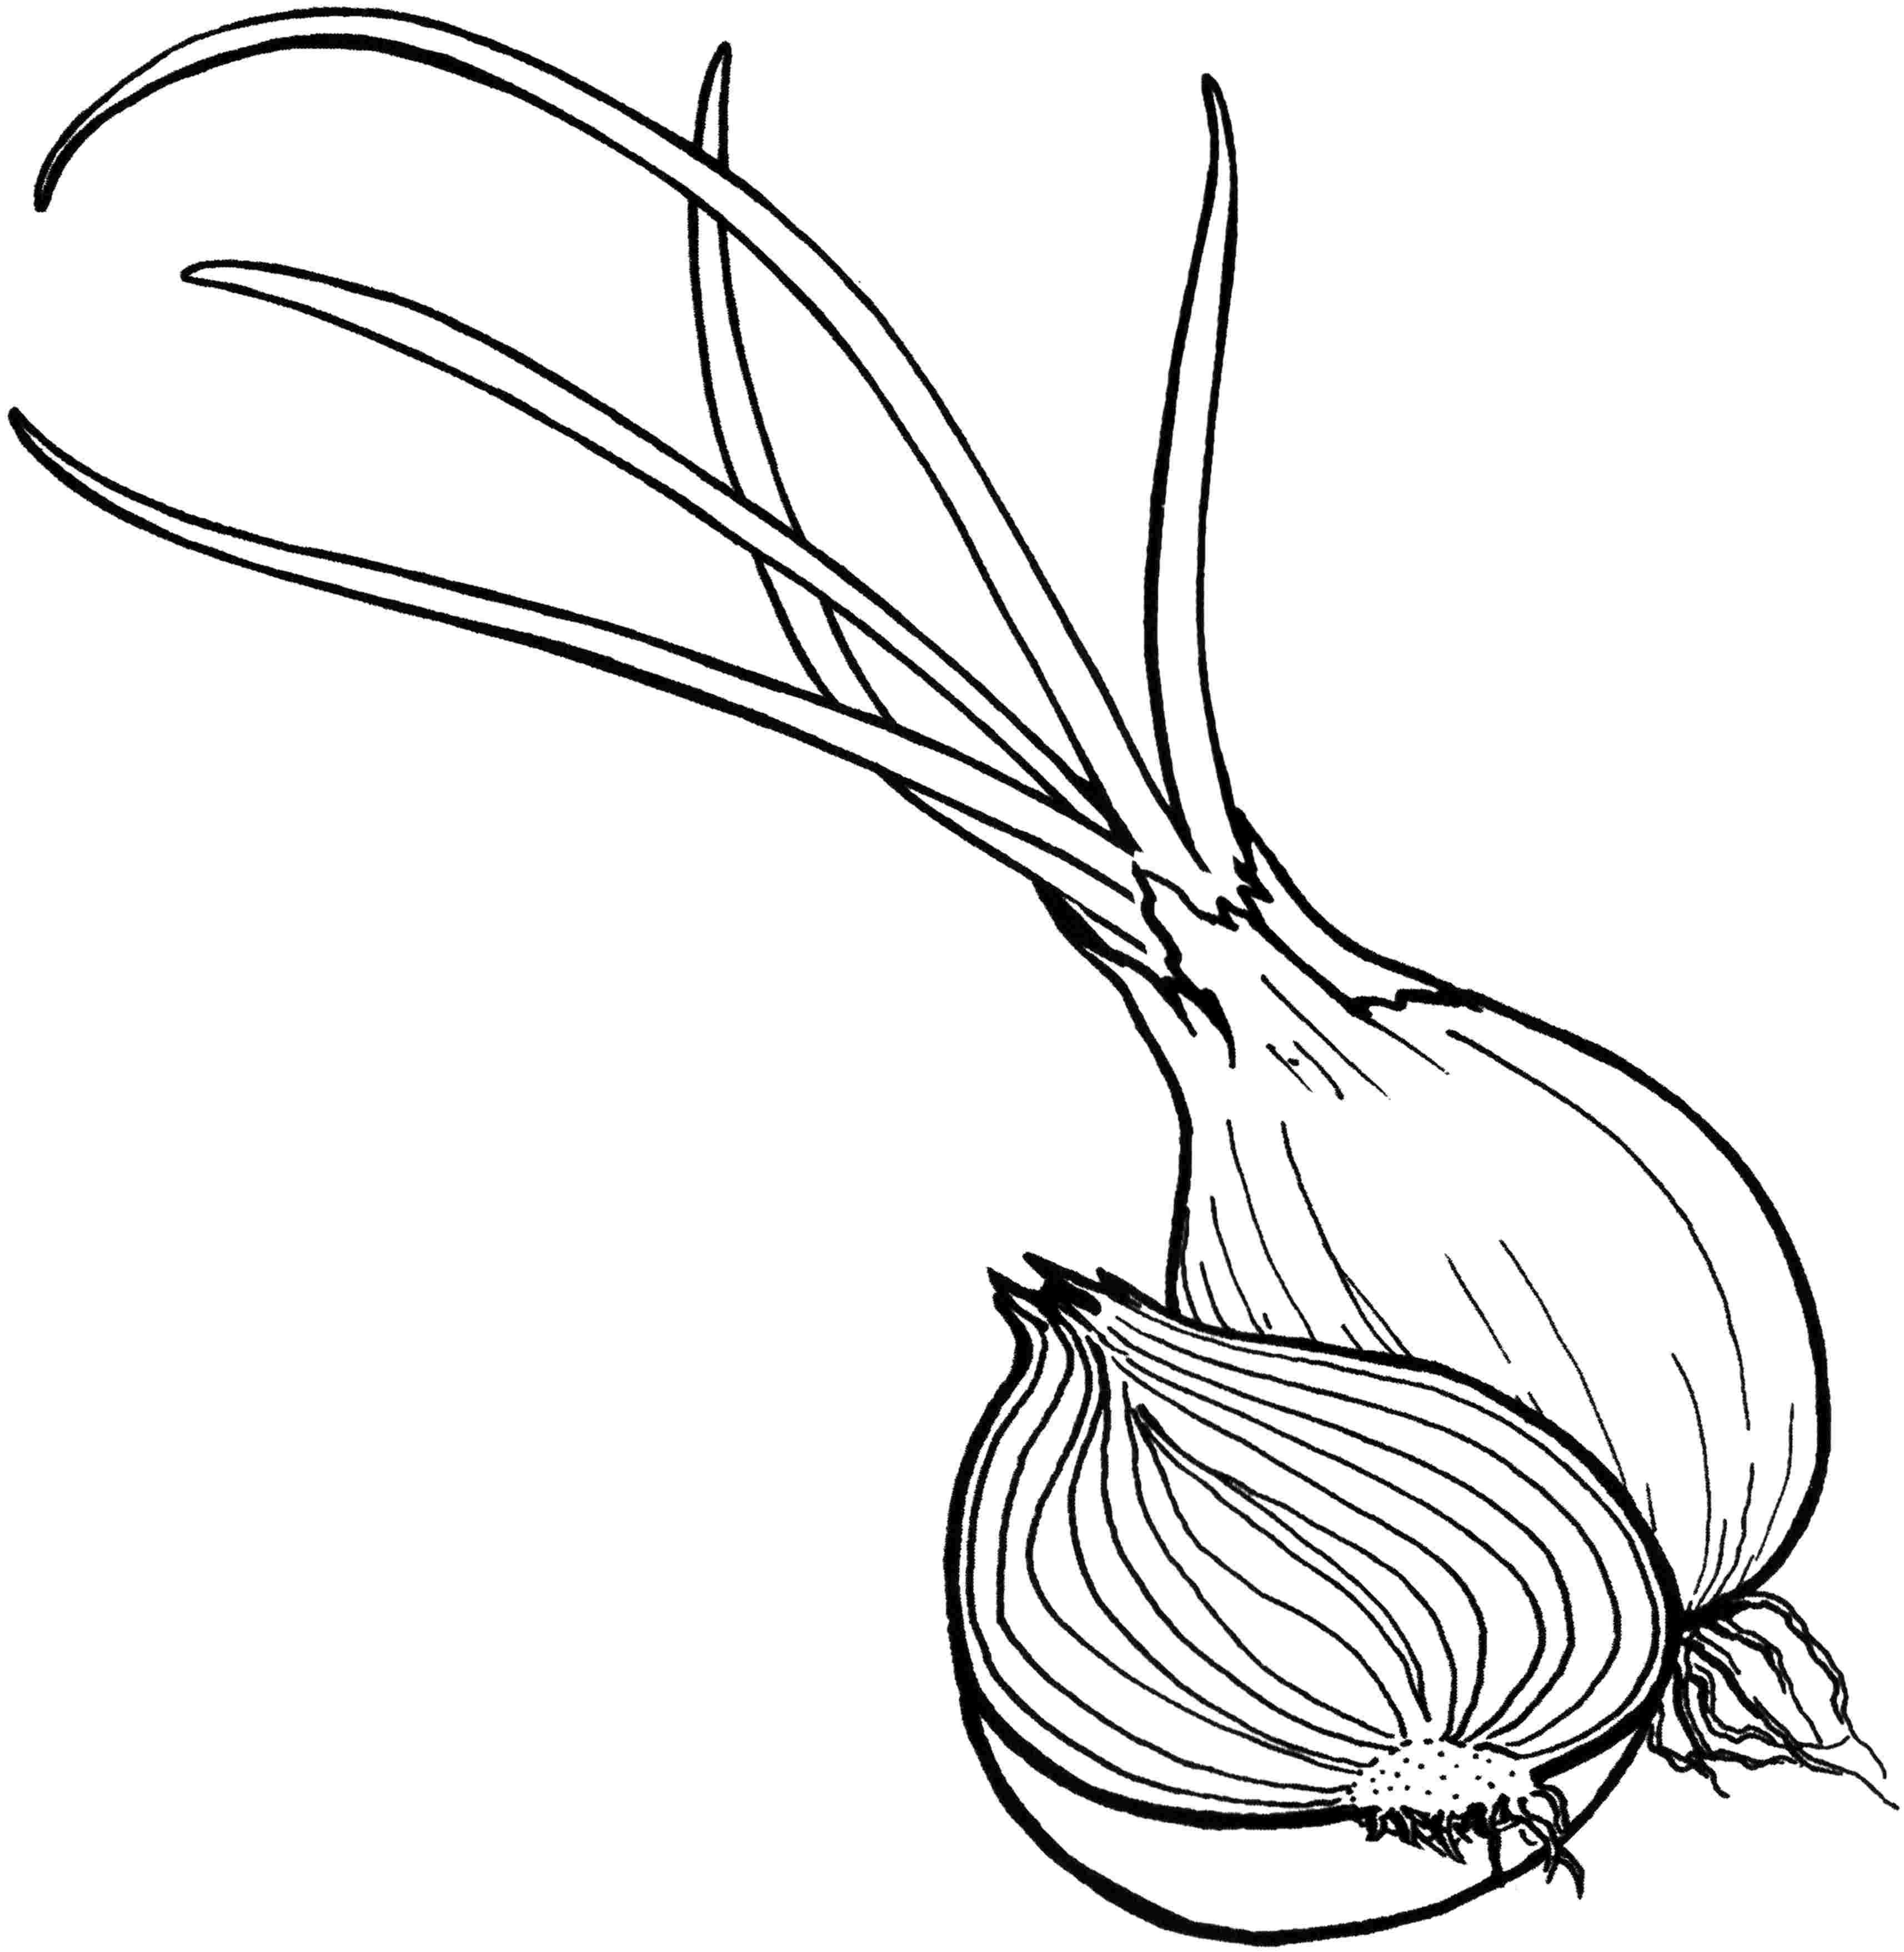 Onion Vegetables Coloring Page